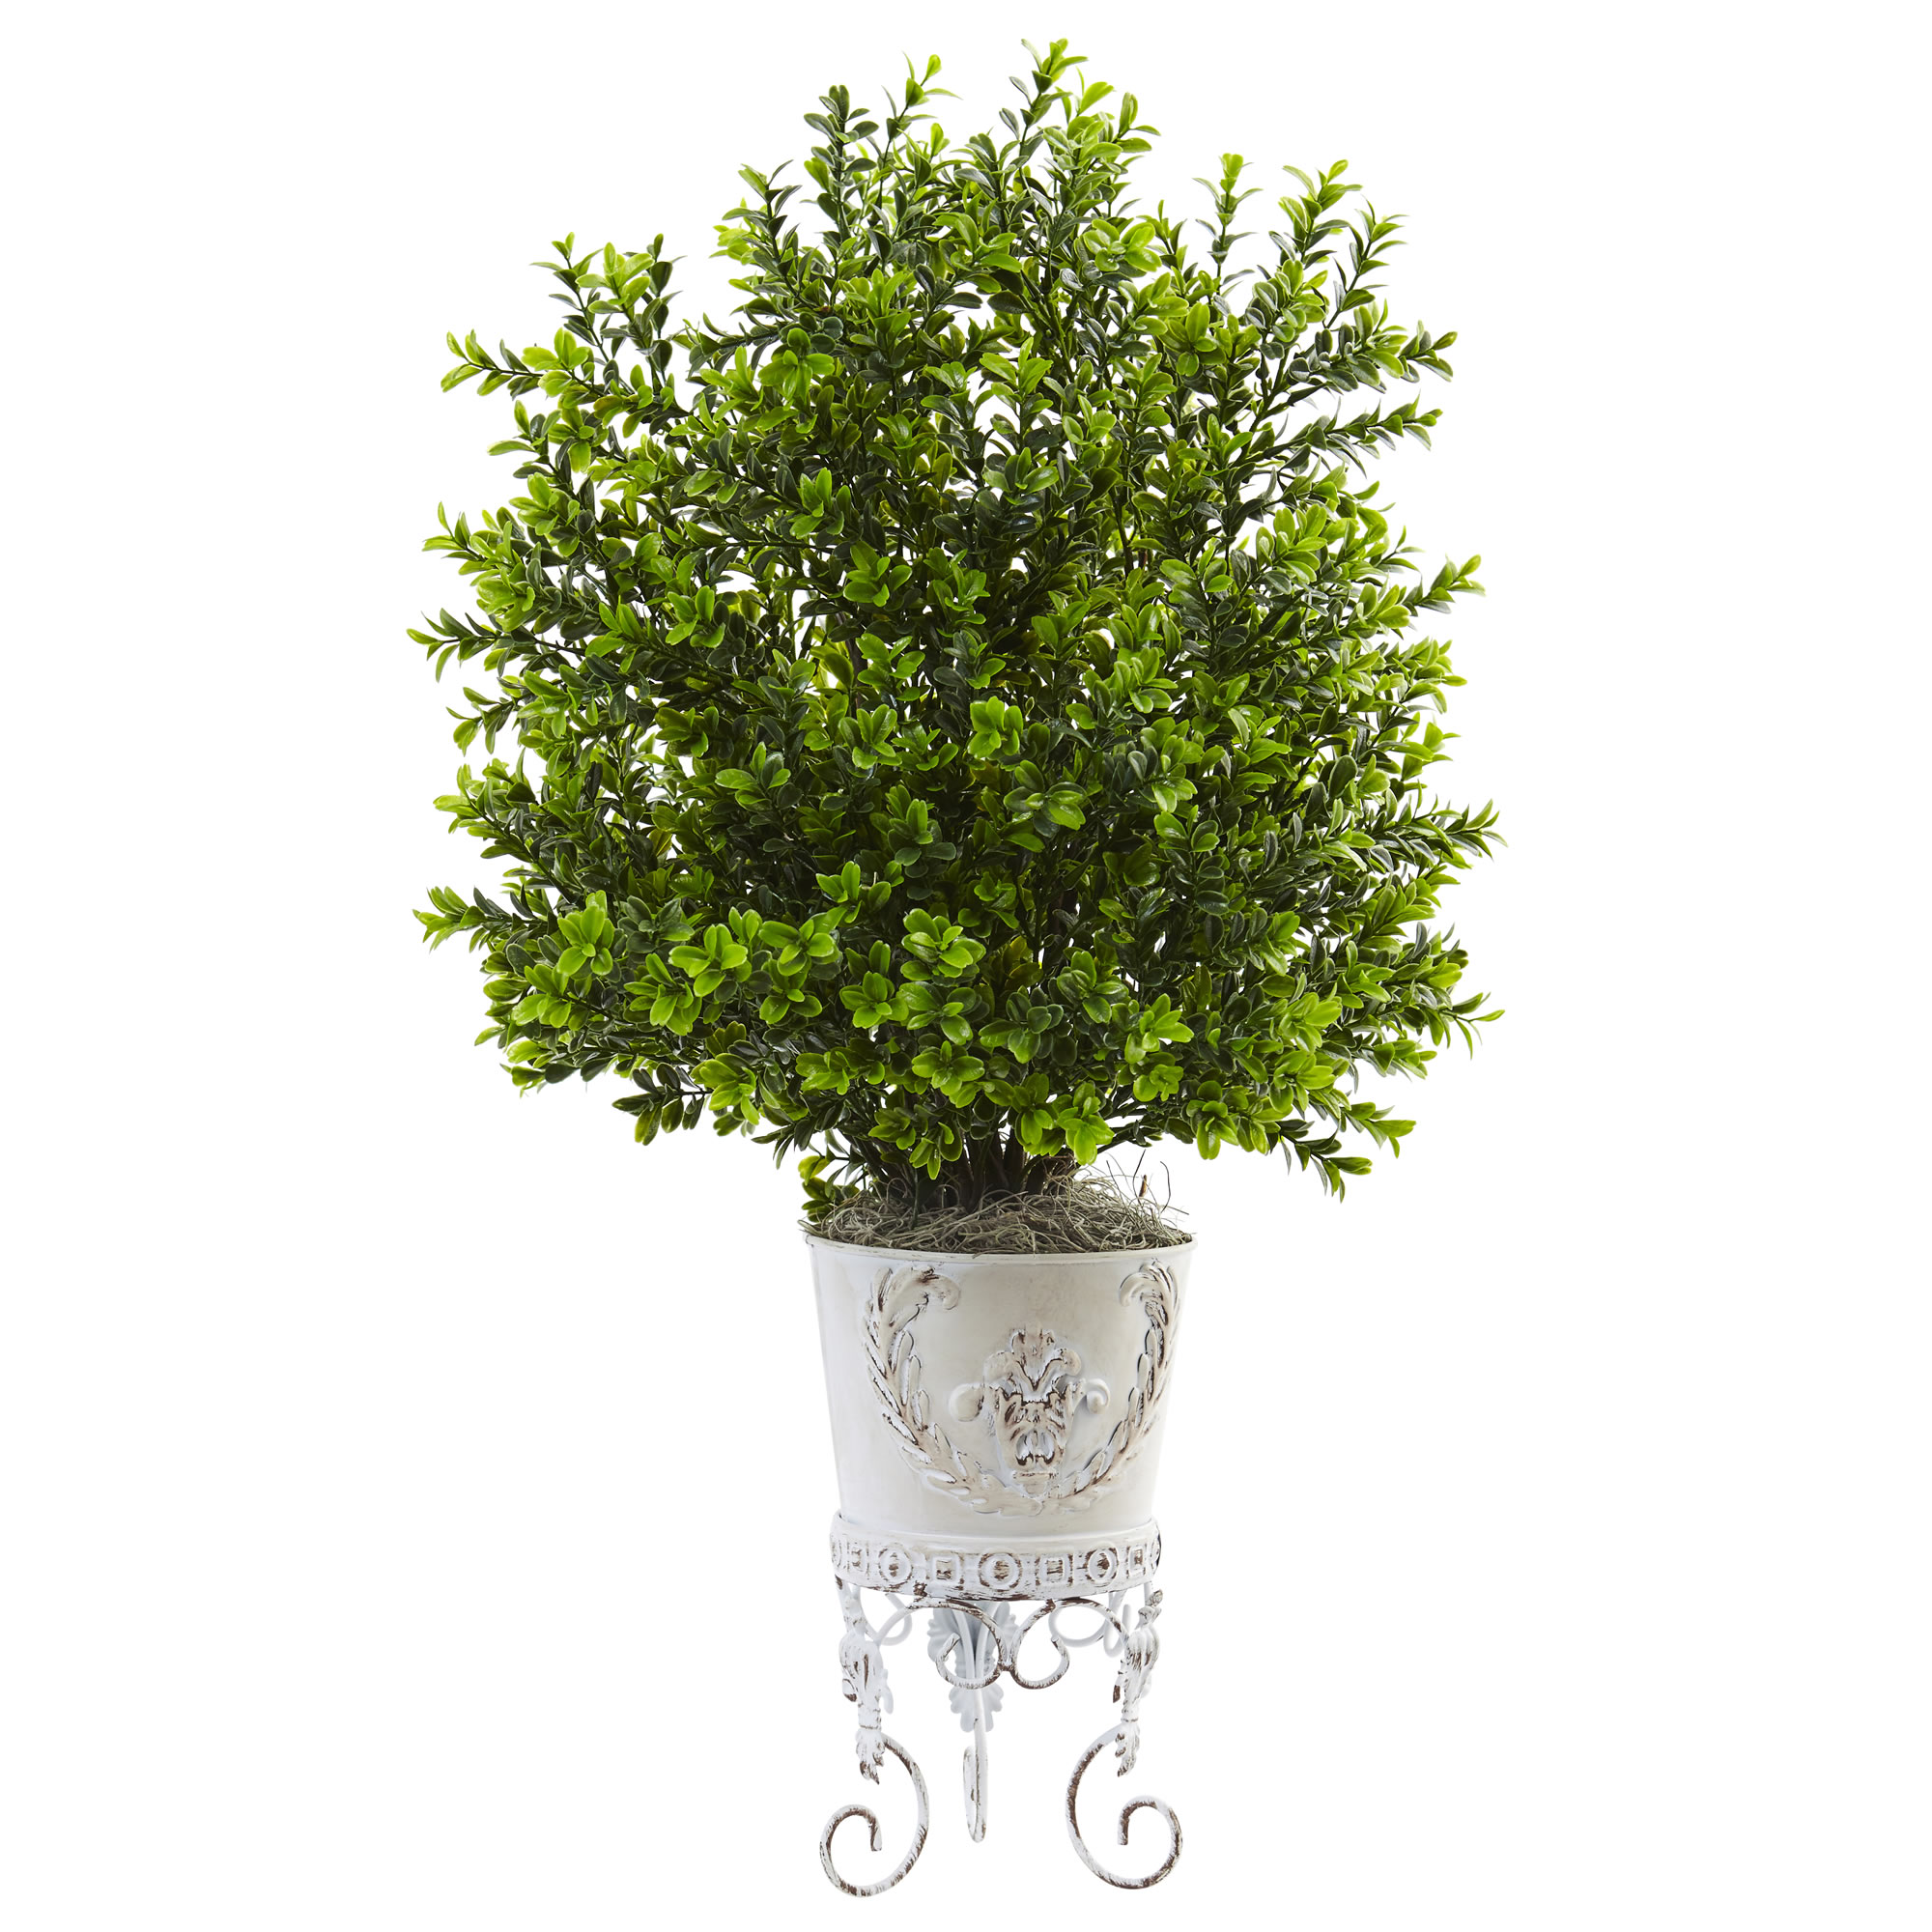 28 Inch Boxwood Bush In Metal Planter: Limited Uv, Covered Areas Only